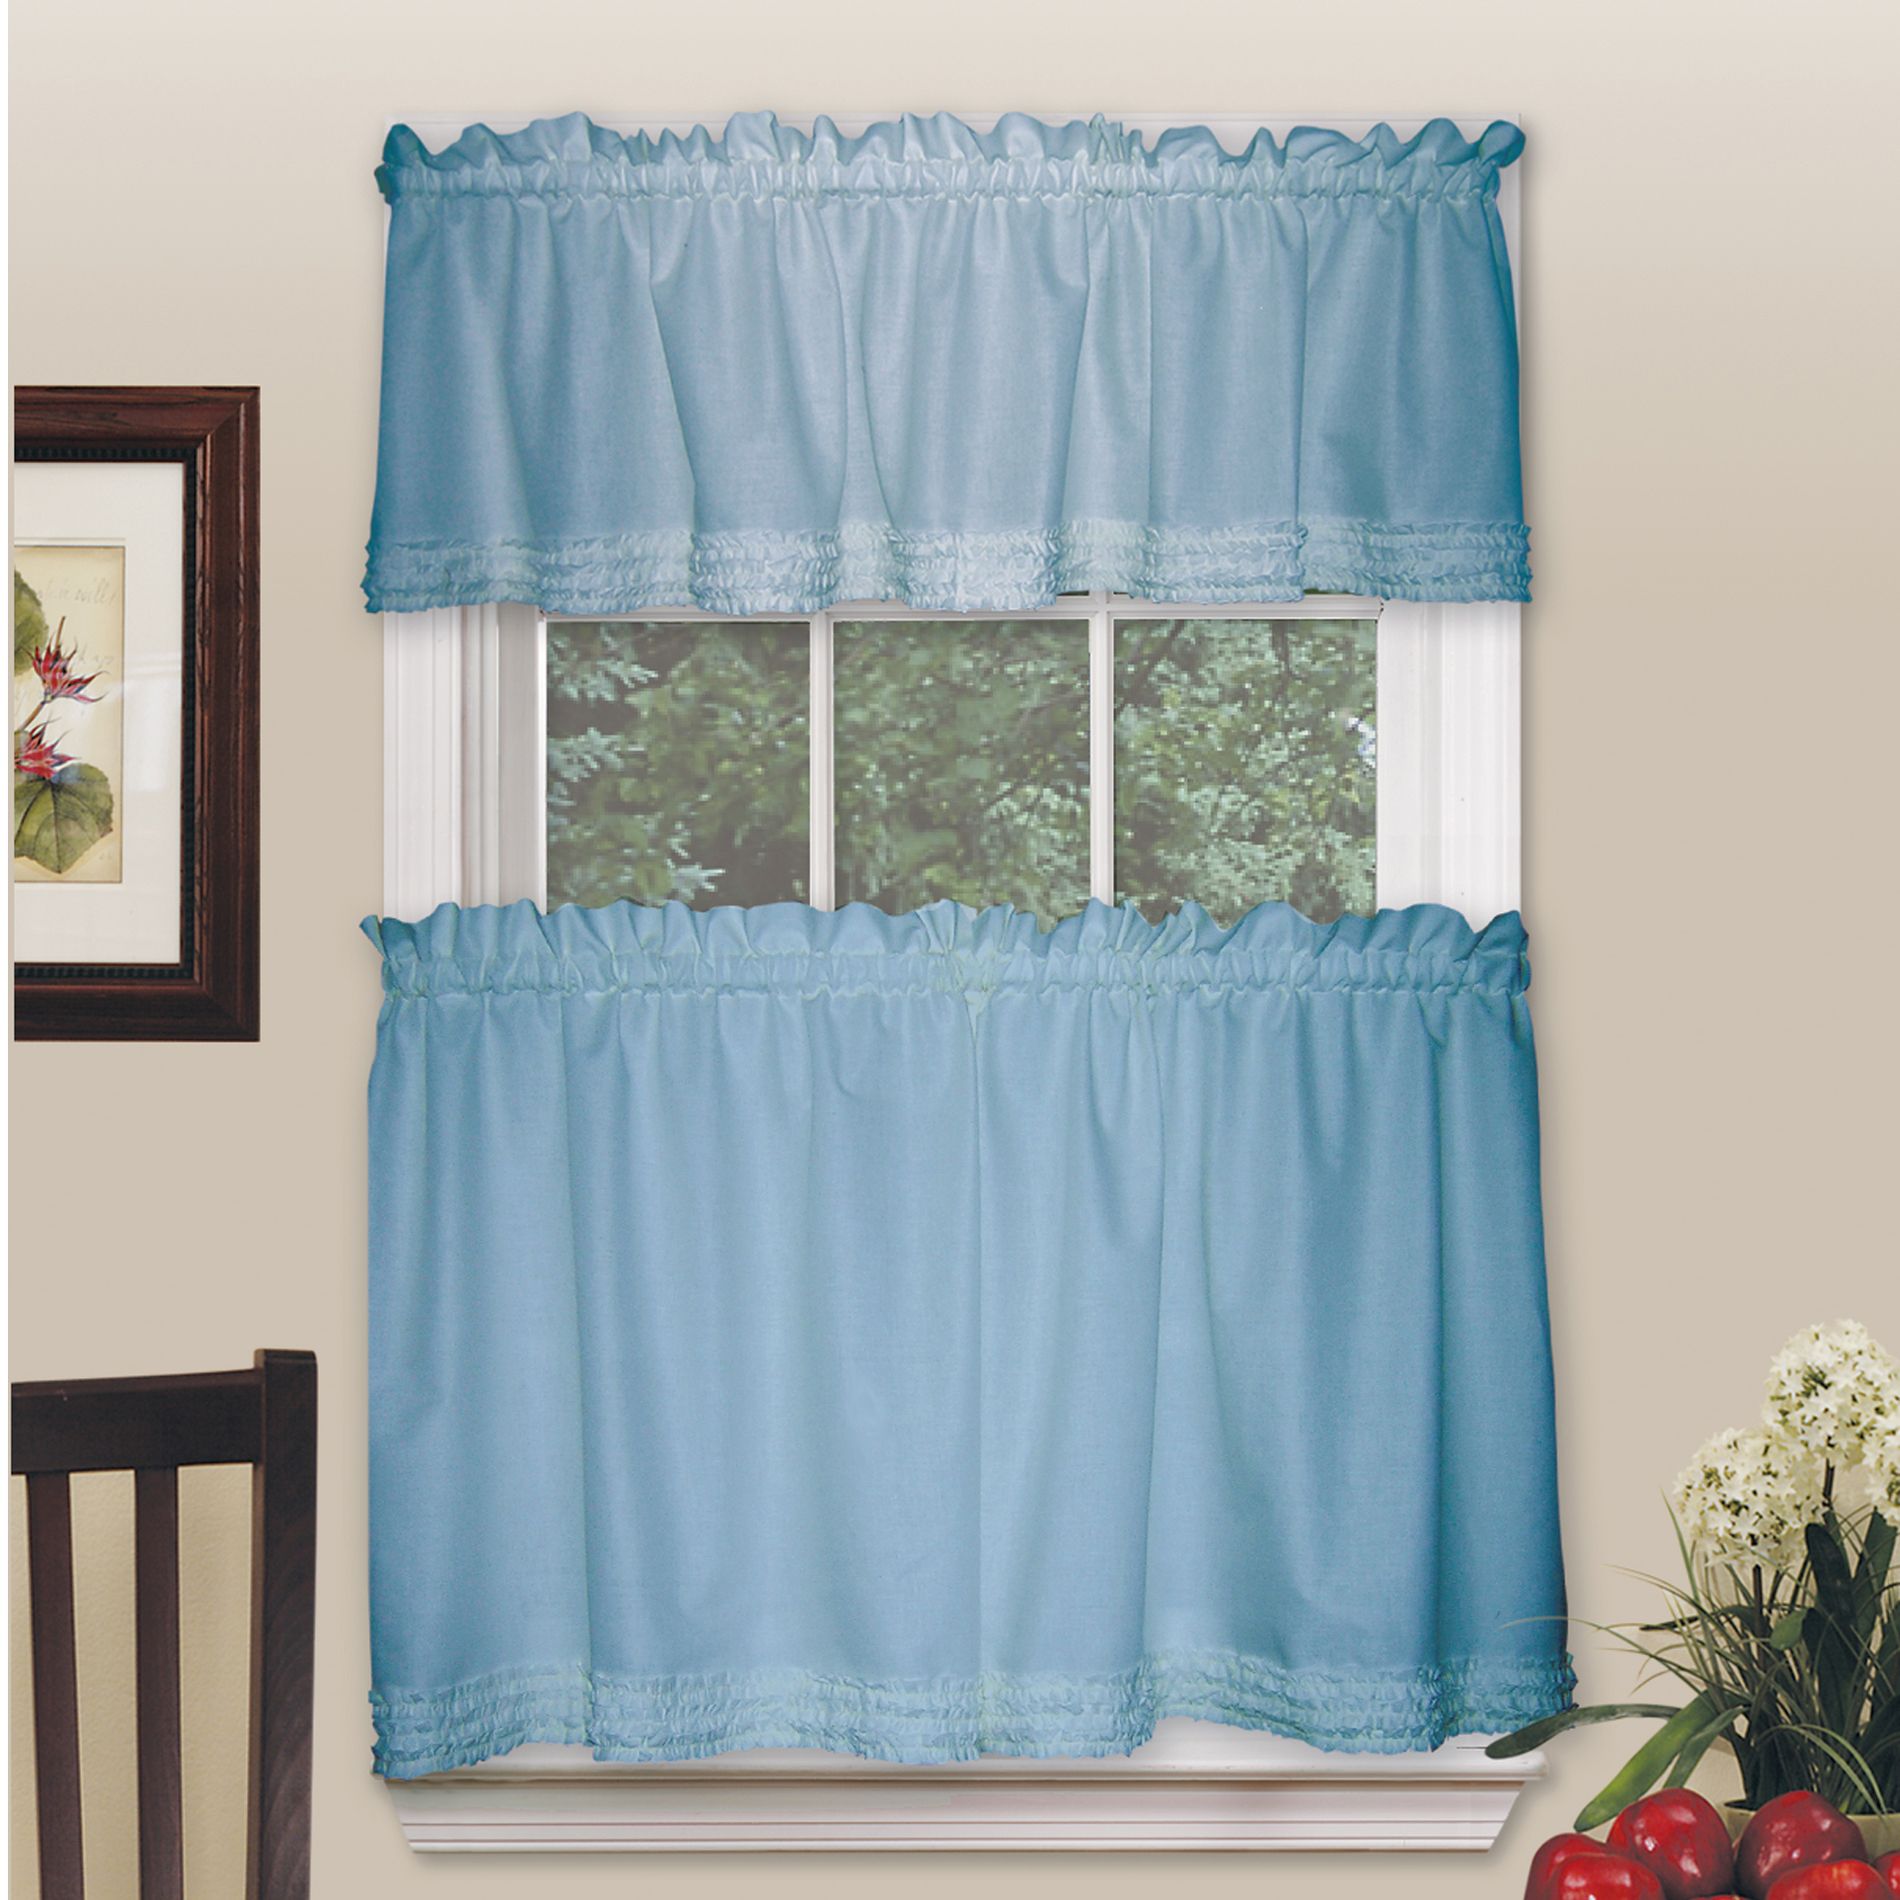 Colormate 60 in. x 14 in. Valance